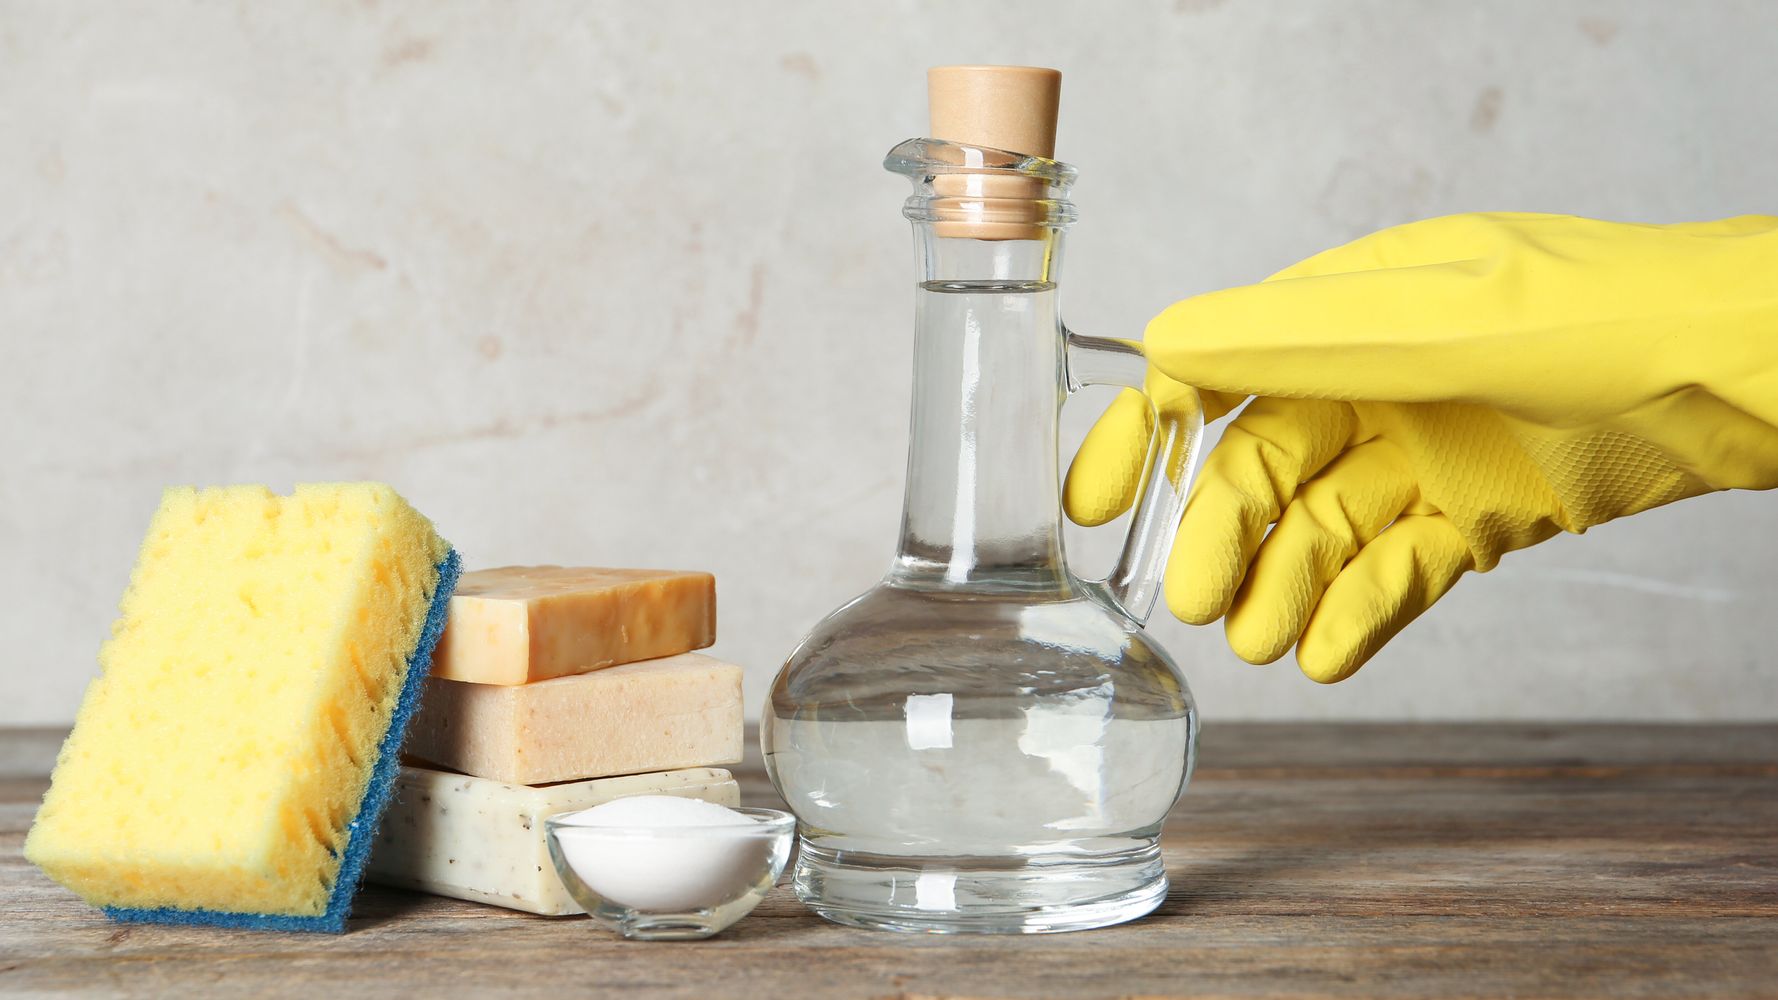 28 ways to clean your house with vinegar - TODAY